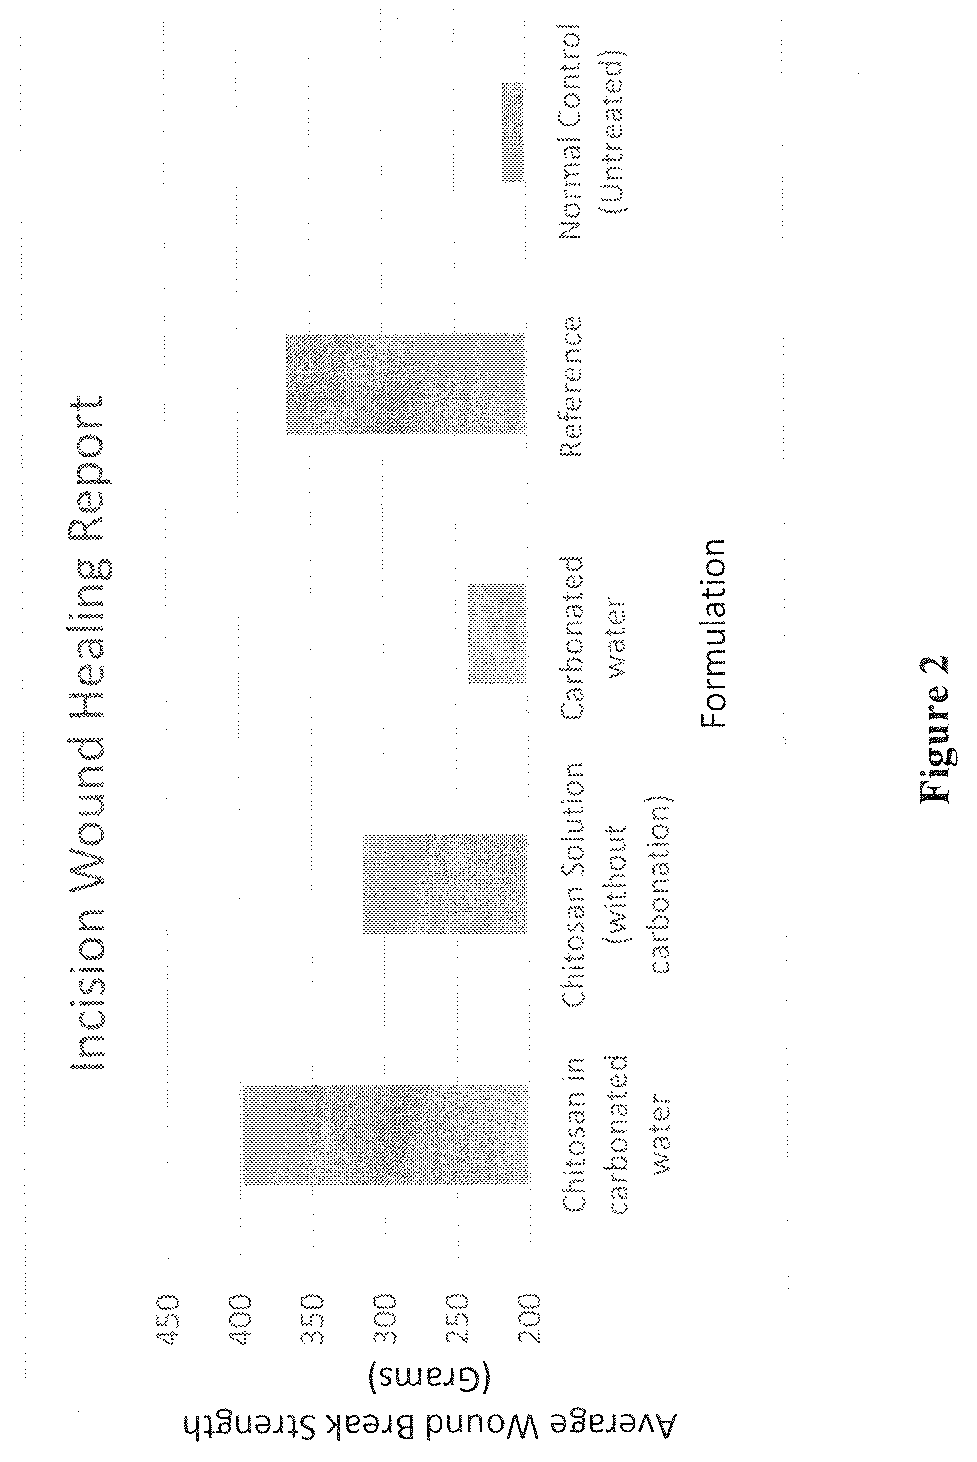 Spray compositions of chitosan for wound healing